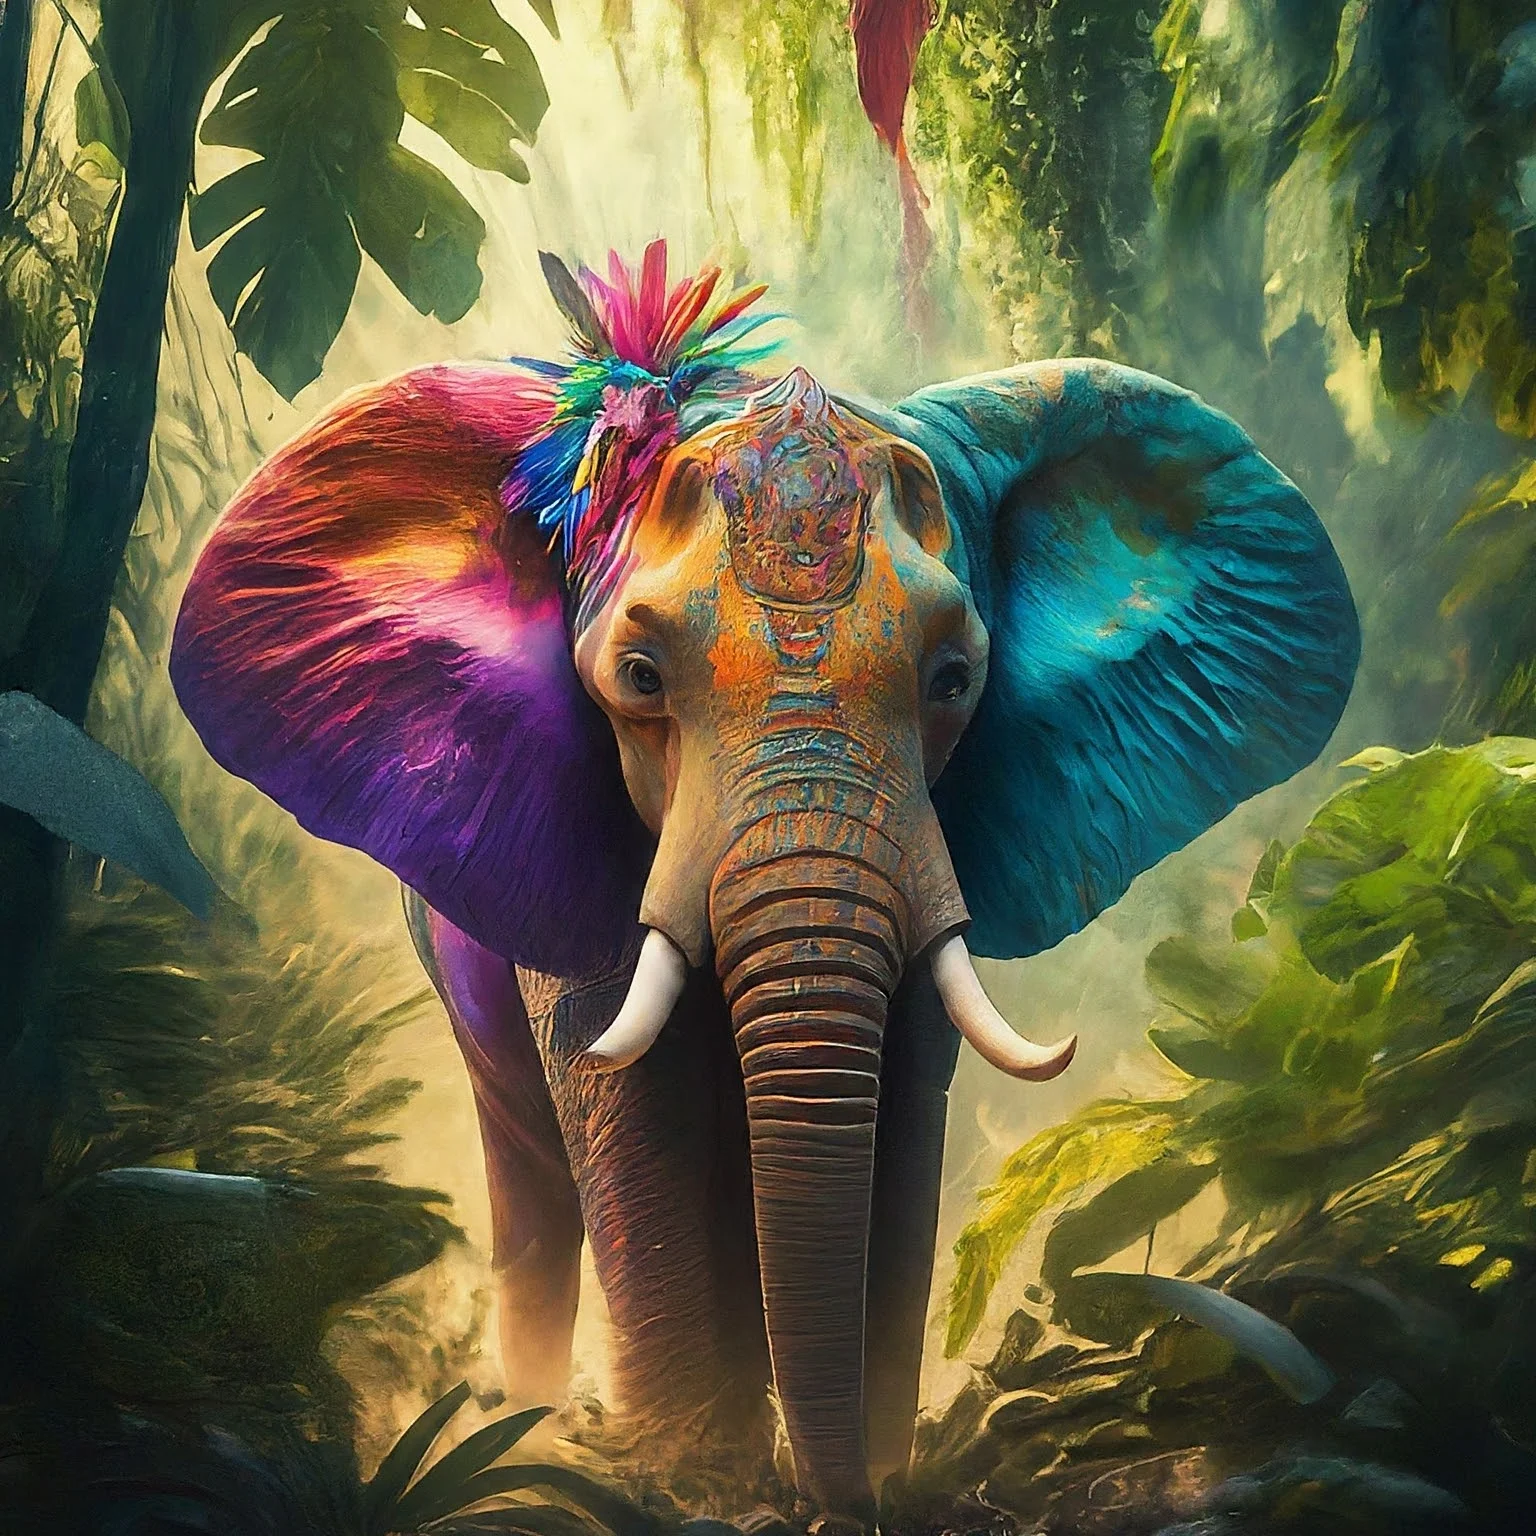 An elephant walking in the jungle with vibrant colors over its body.